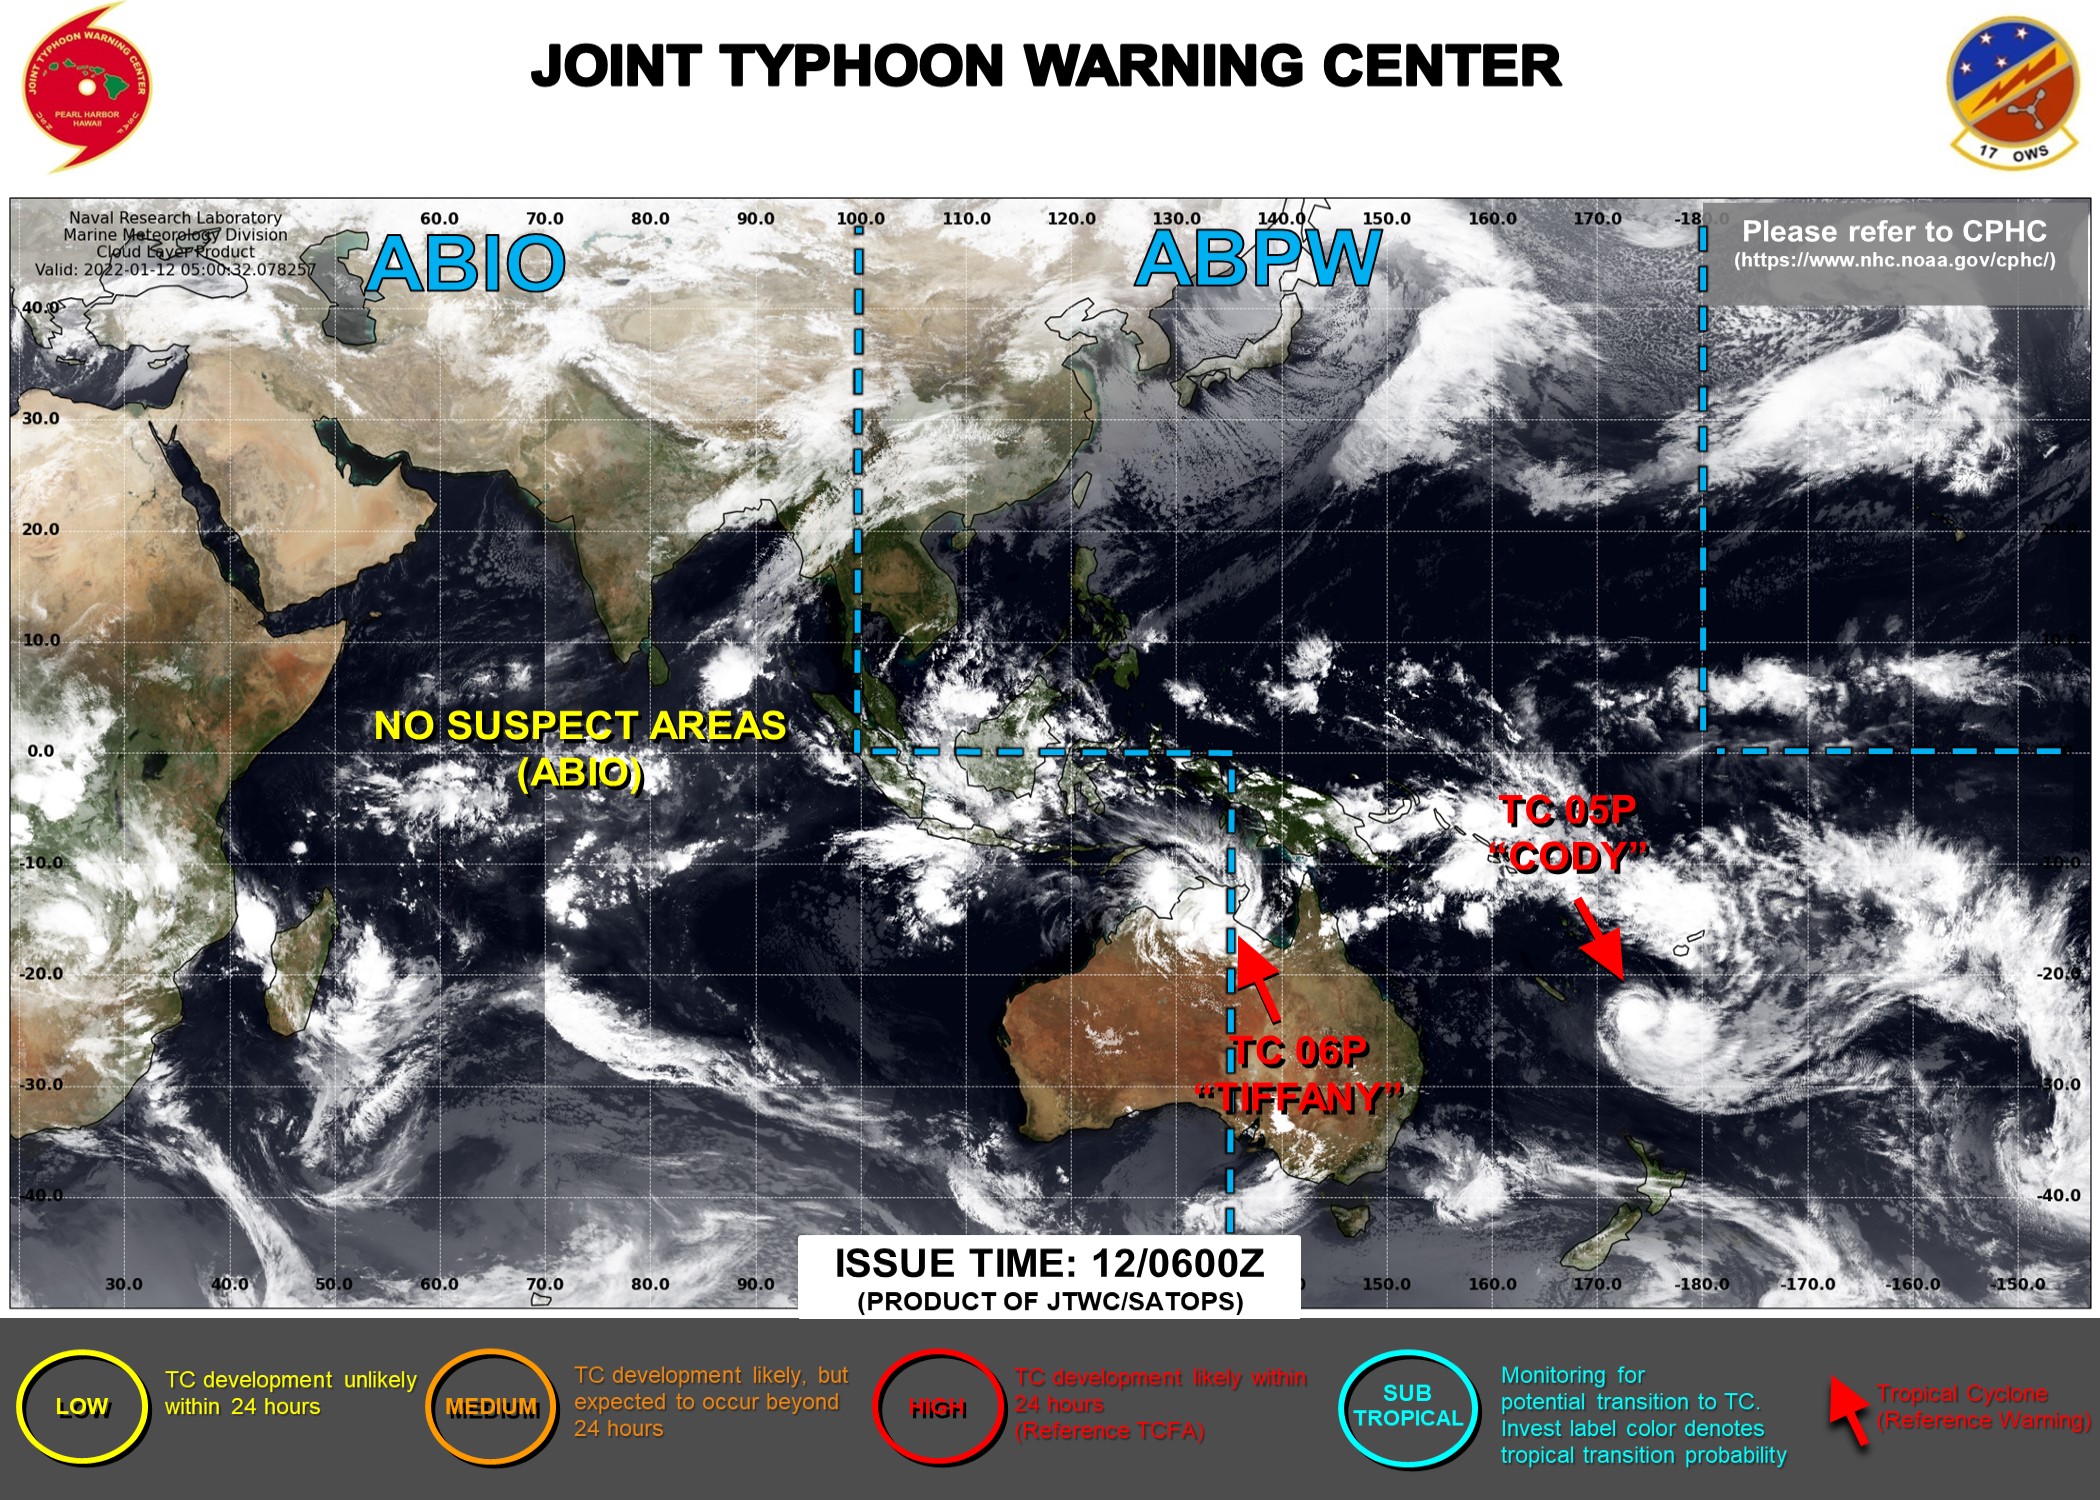 JTWC IS ISSUING 6HOURLY WARNINGS ON TC 05P(CODY). WARNING 12/FINAL ON TC 06P(TIFFANY) WAS ISSUED AT 12/03UTC.THE OVER-LAND SYSTEM IS STILL CLOSELY MONITORED. 3HOURLY SATELLITE BULLETINS ARE STILL ISSUED ON BOTH SYSTEMS.